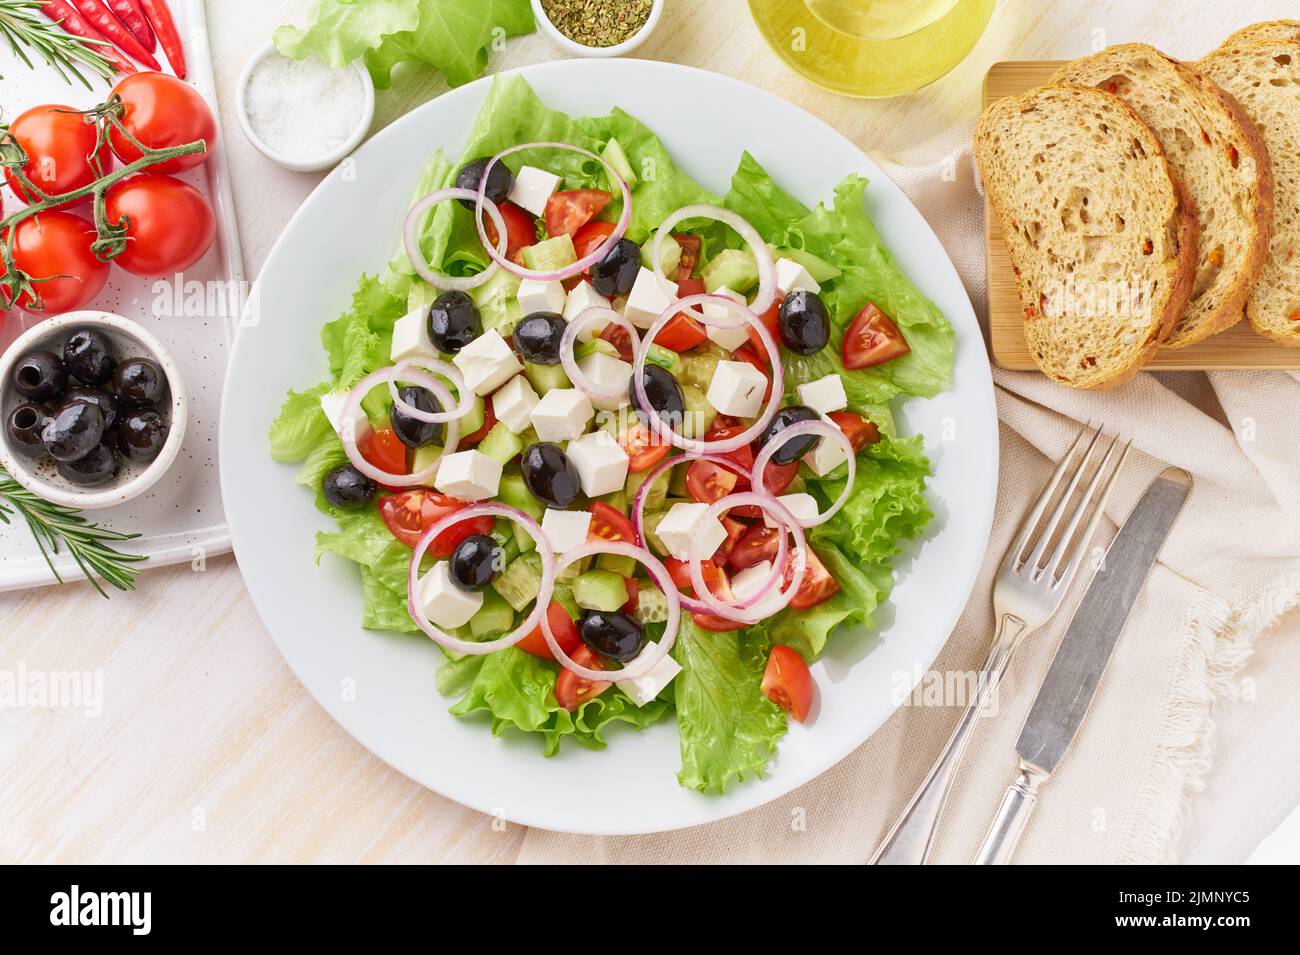 Greek salad on white plate on old rustic white wooden table, fresh salad Stock Photo